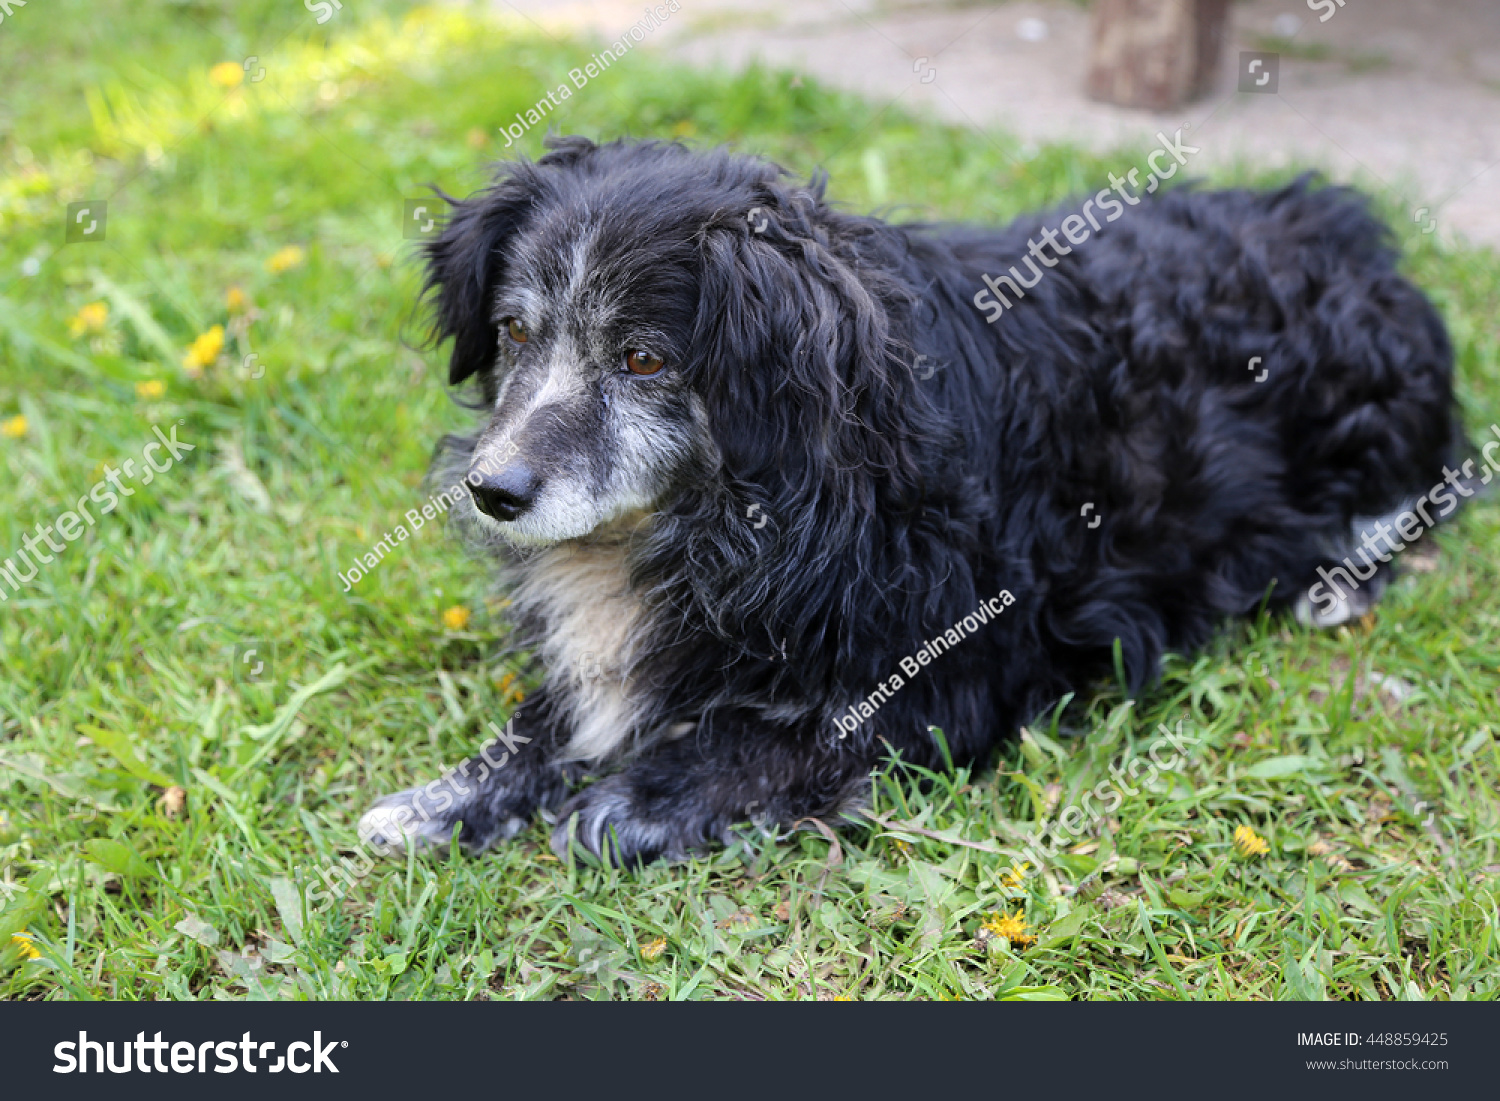 The old black dog with a gray-haired muzzle lies on a green grass. #448859425